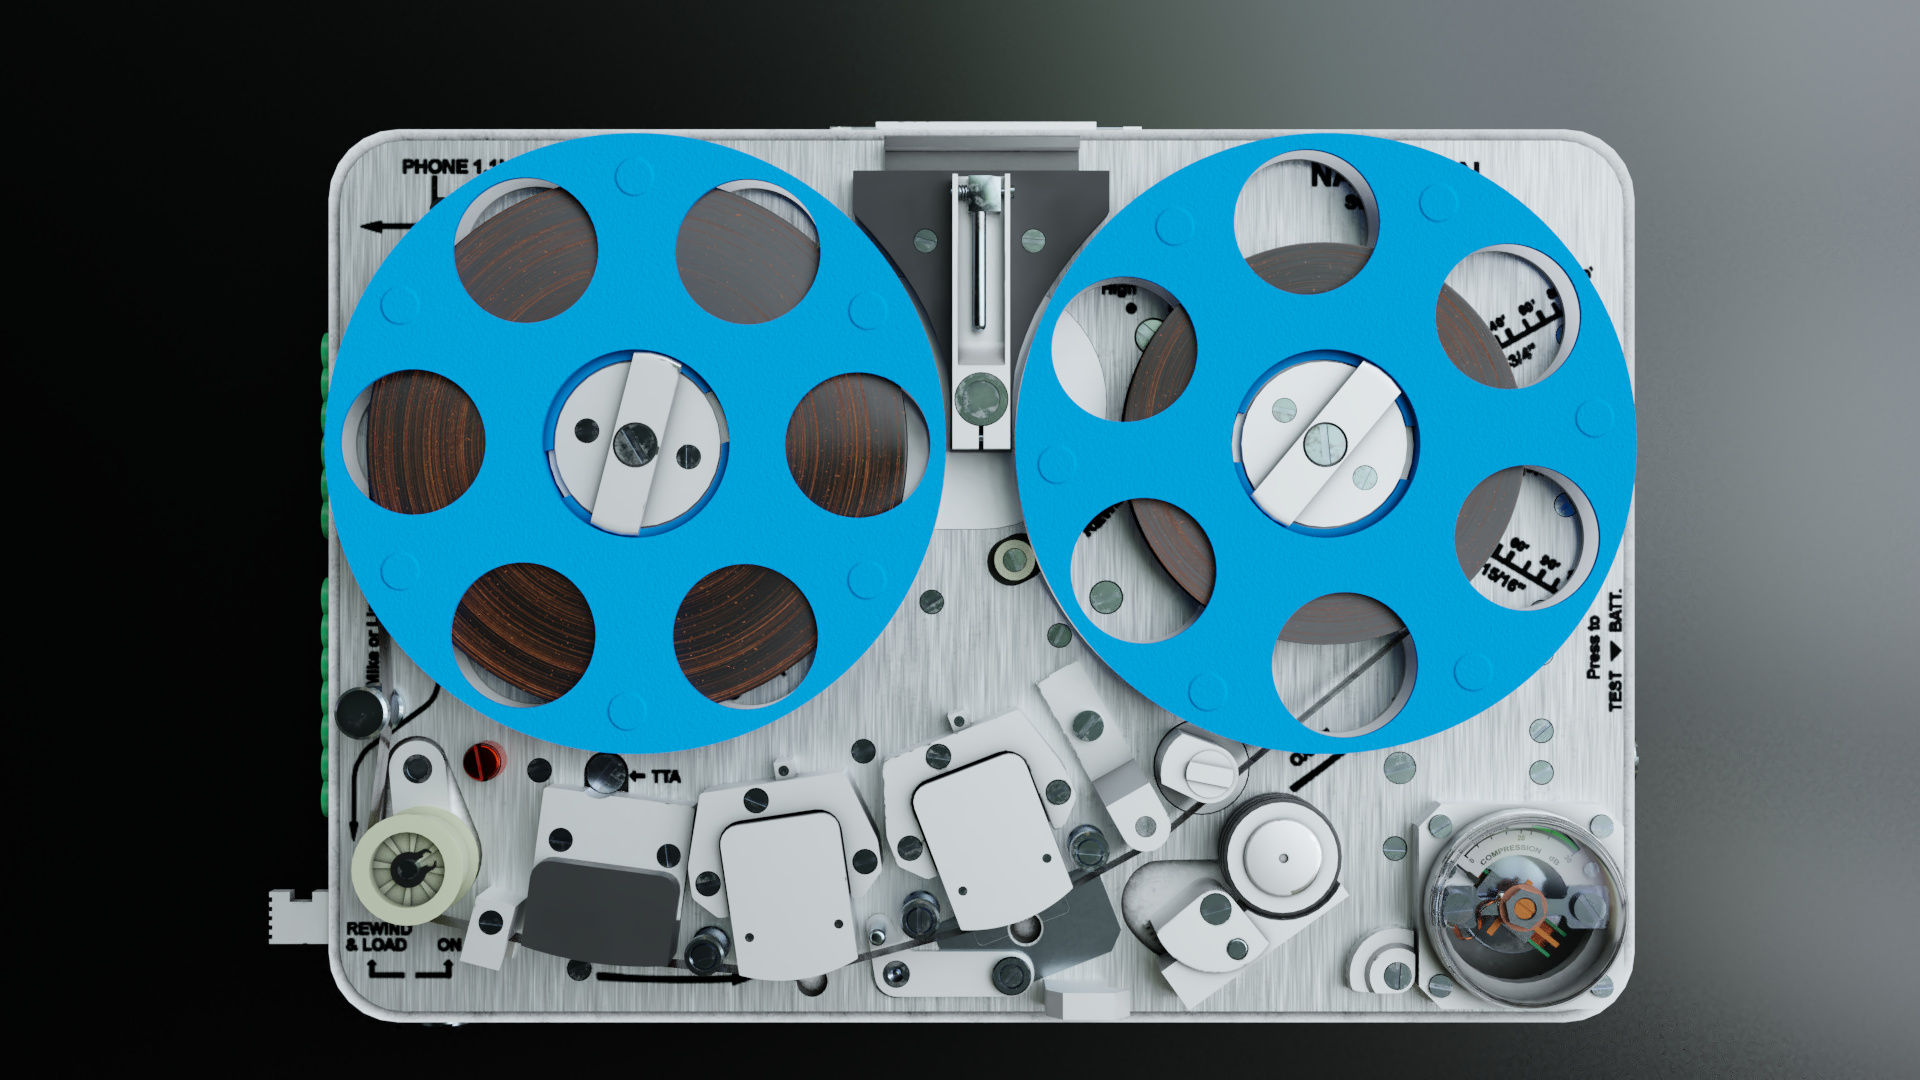 Nagra SN reel to reel recorder - Finished Projects - Blender Artists  Community